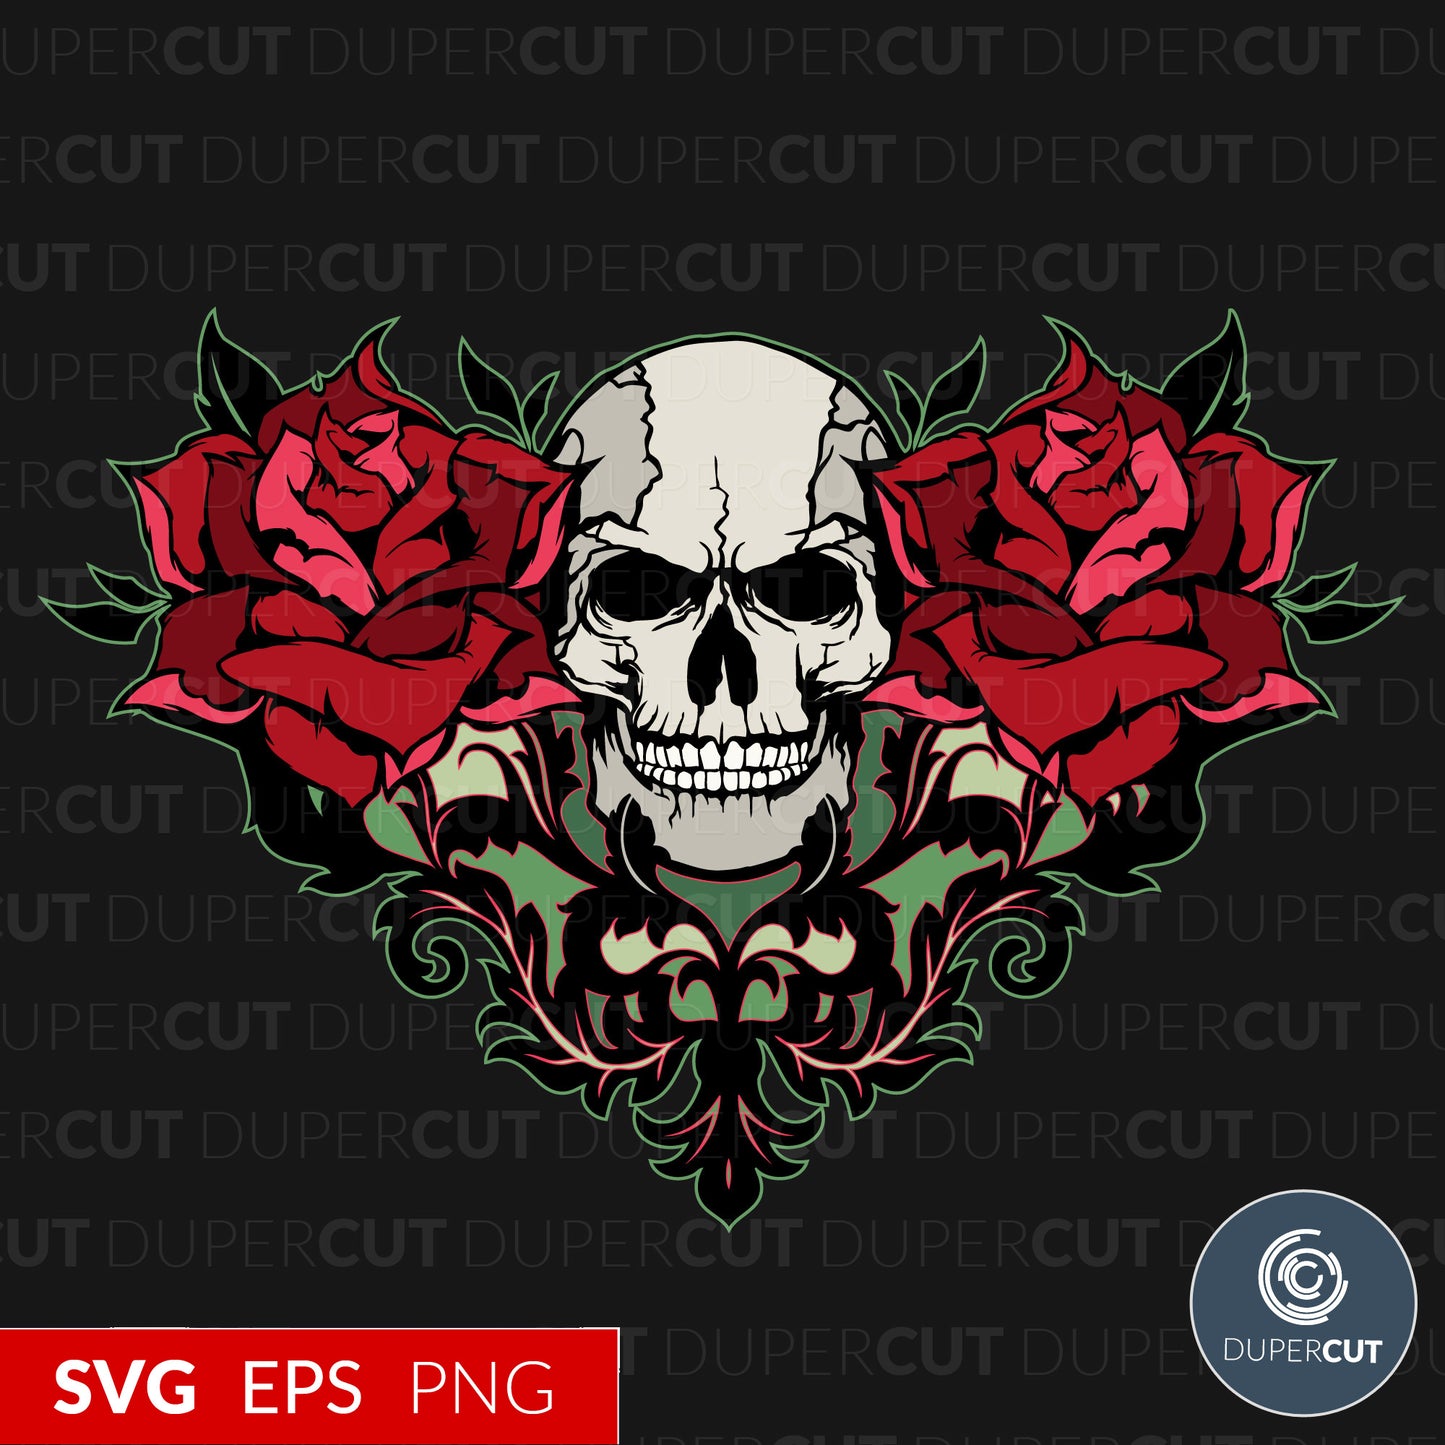 Skull and roses - EPS, SVG, PNG files. Vector Colour illustration for print on demand, sublimation, custom t-shirts, hoodies, tumblers.